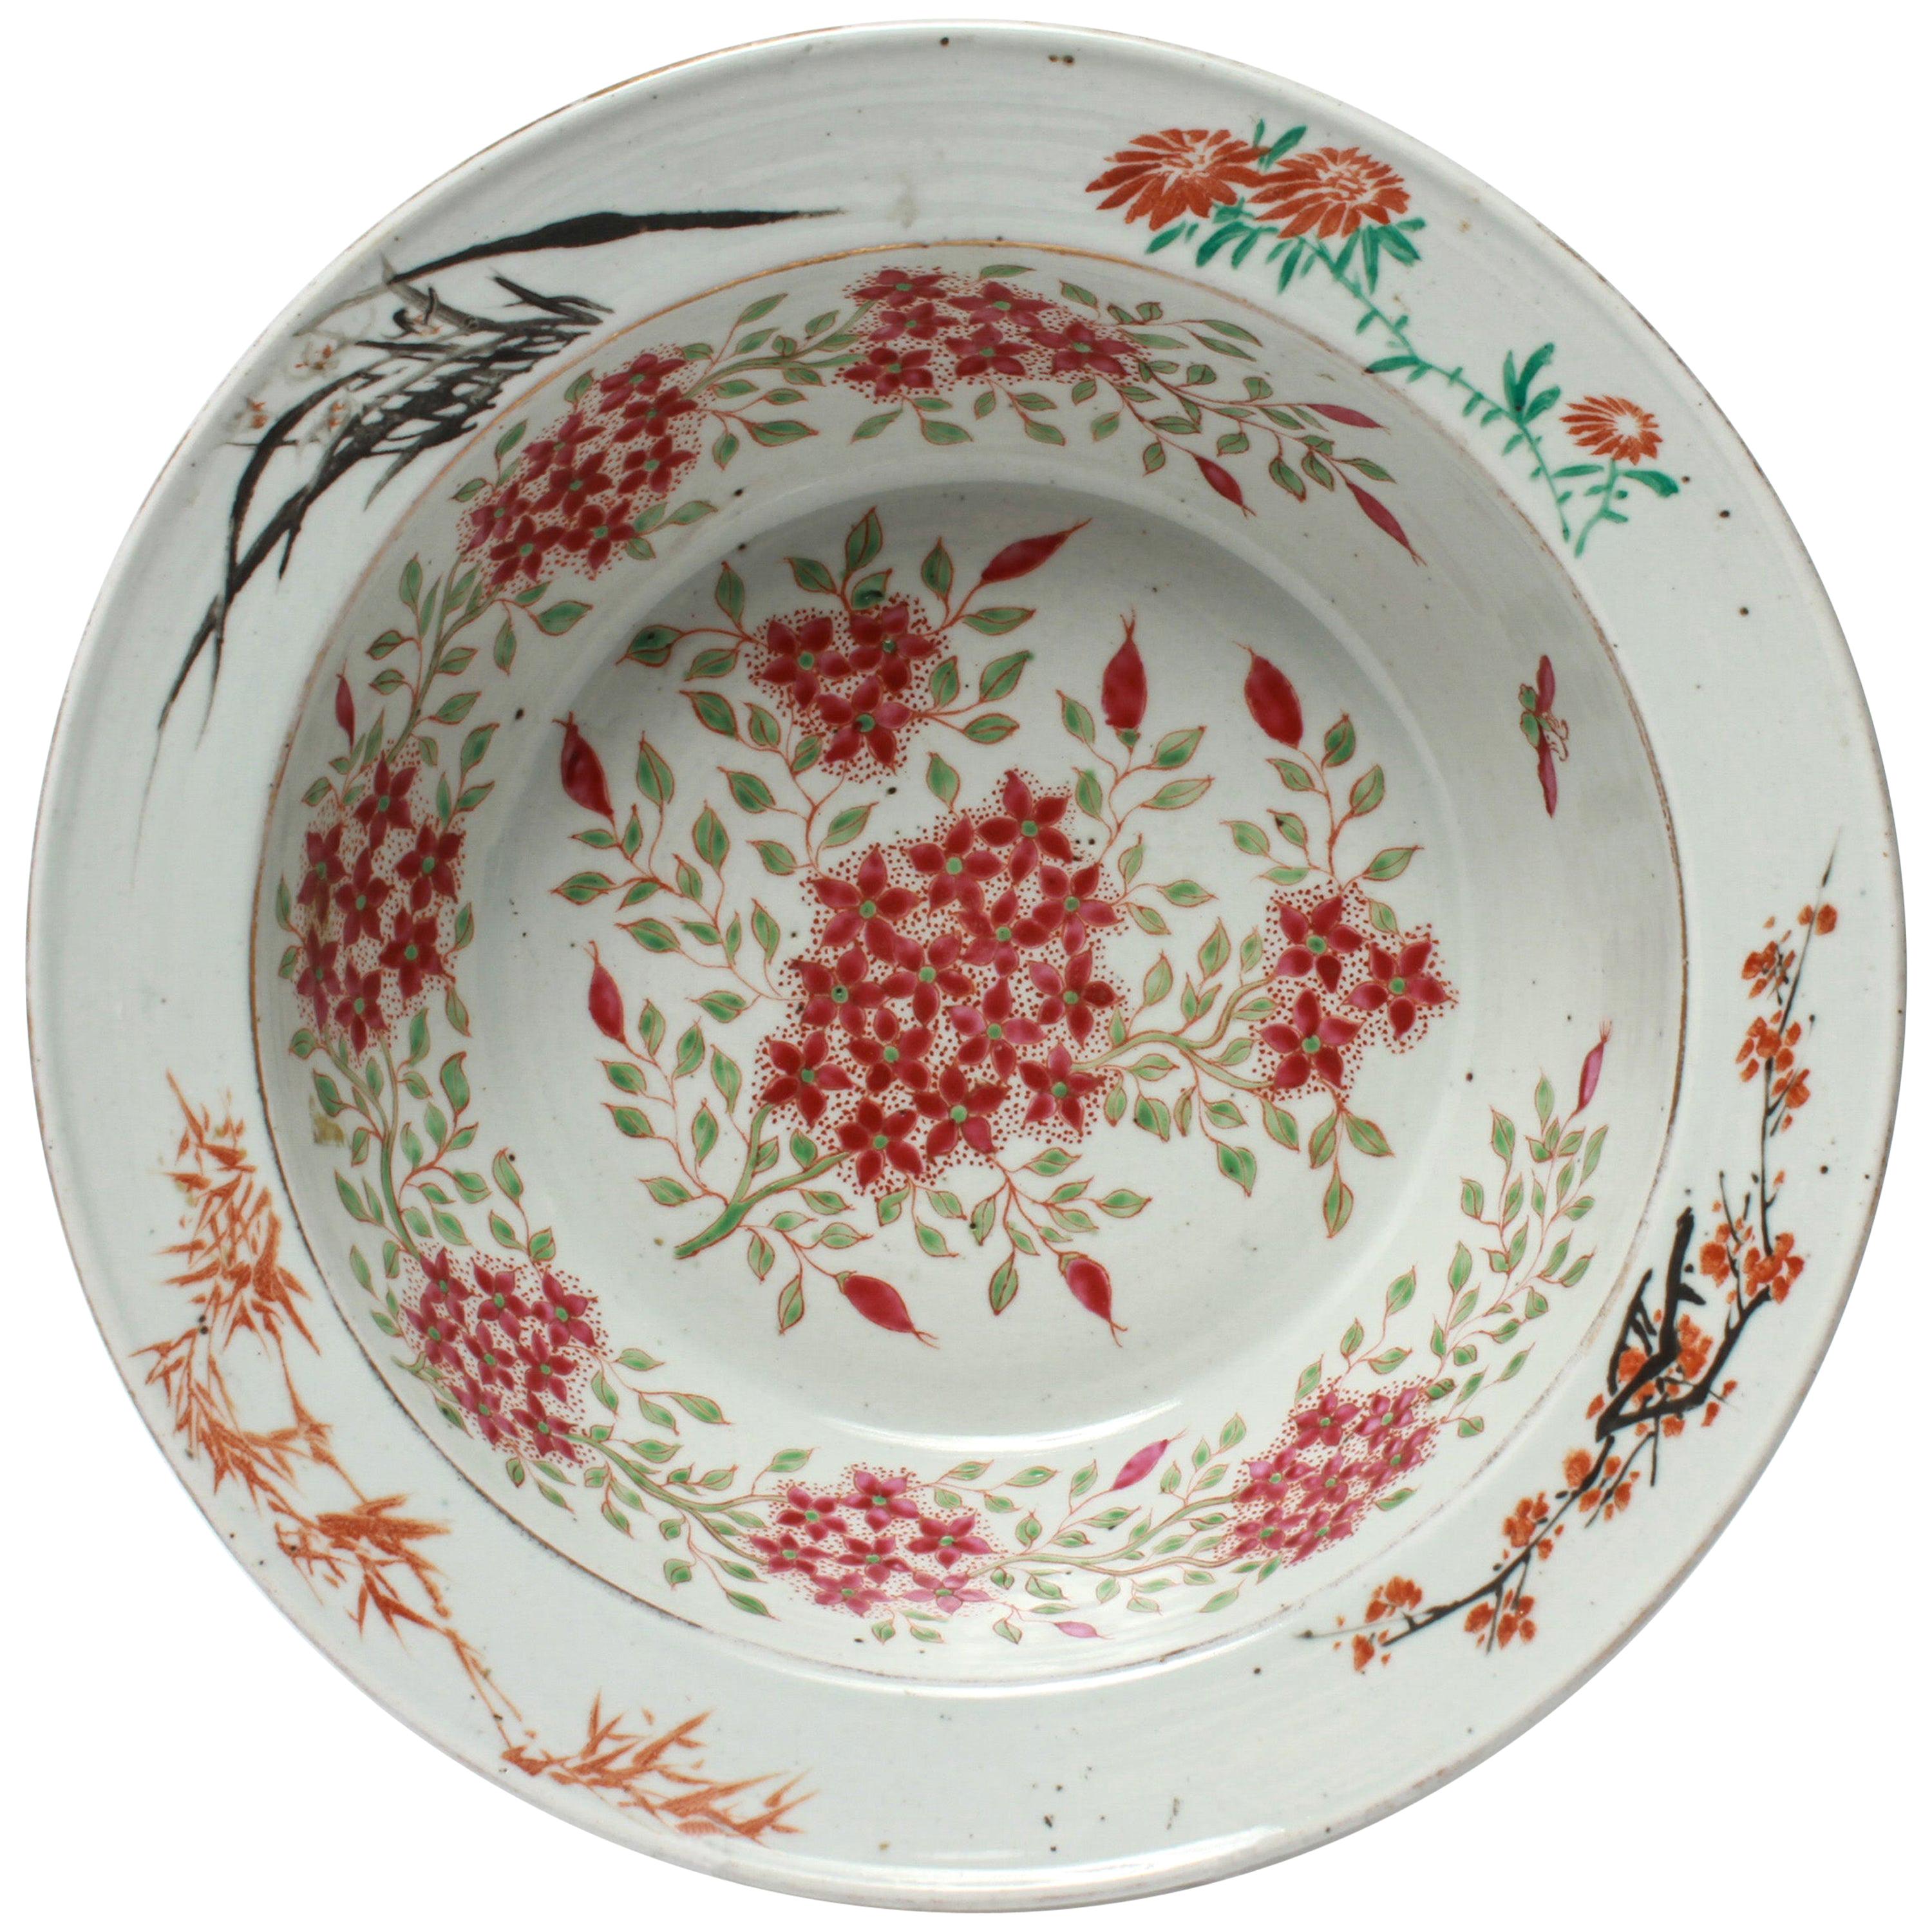 Chinese Export Famille Rose Porcelain Bowl or Basin with Floral Motif